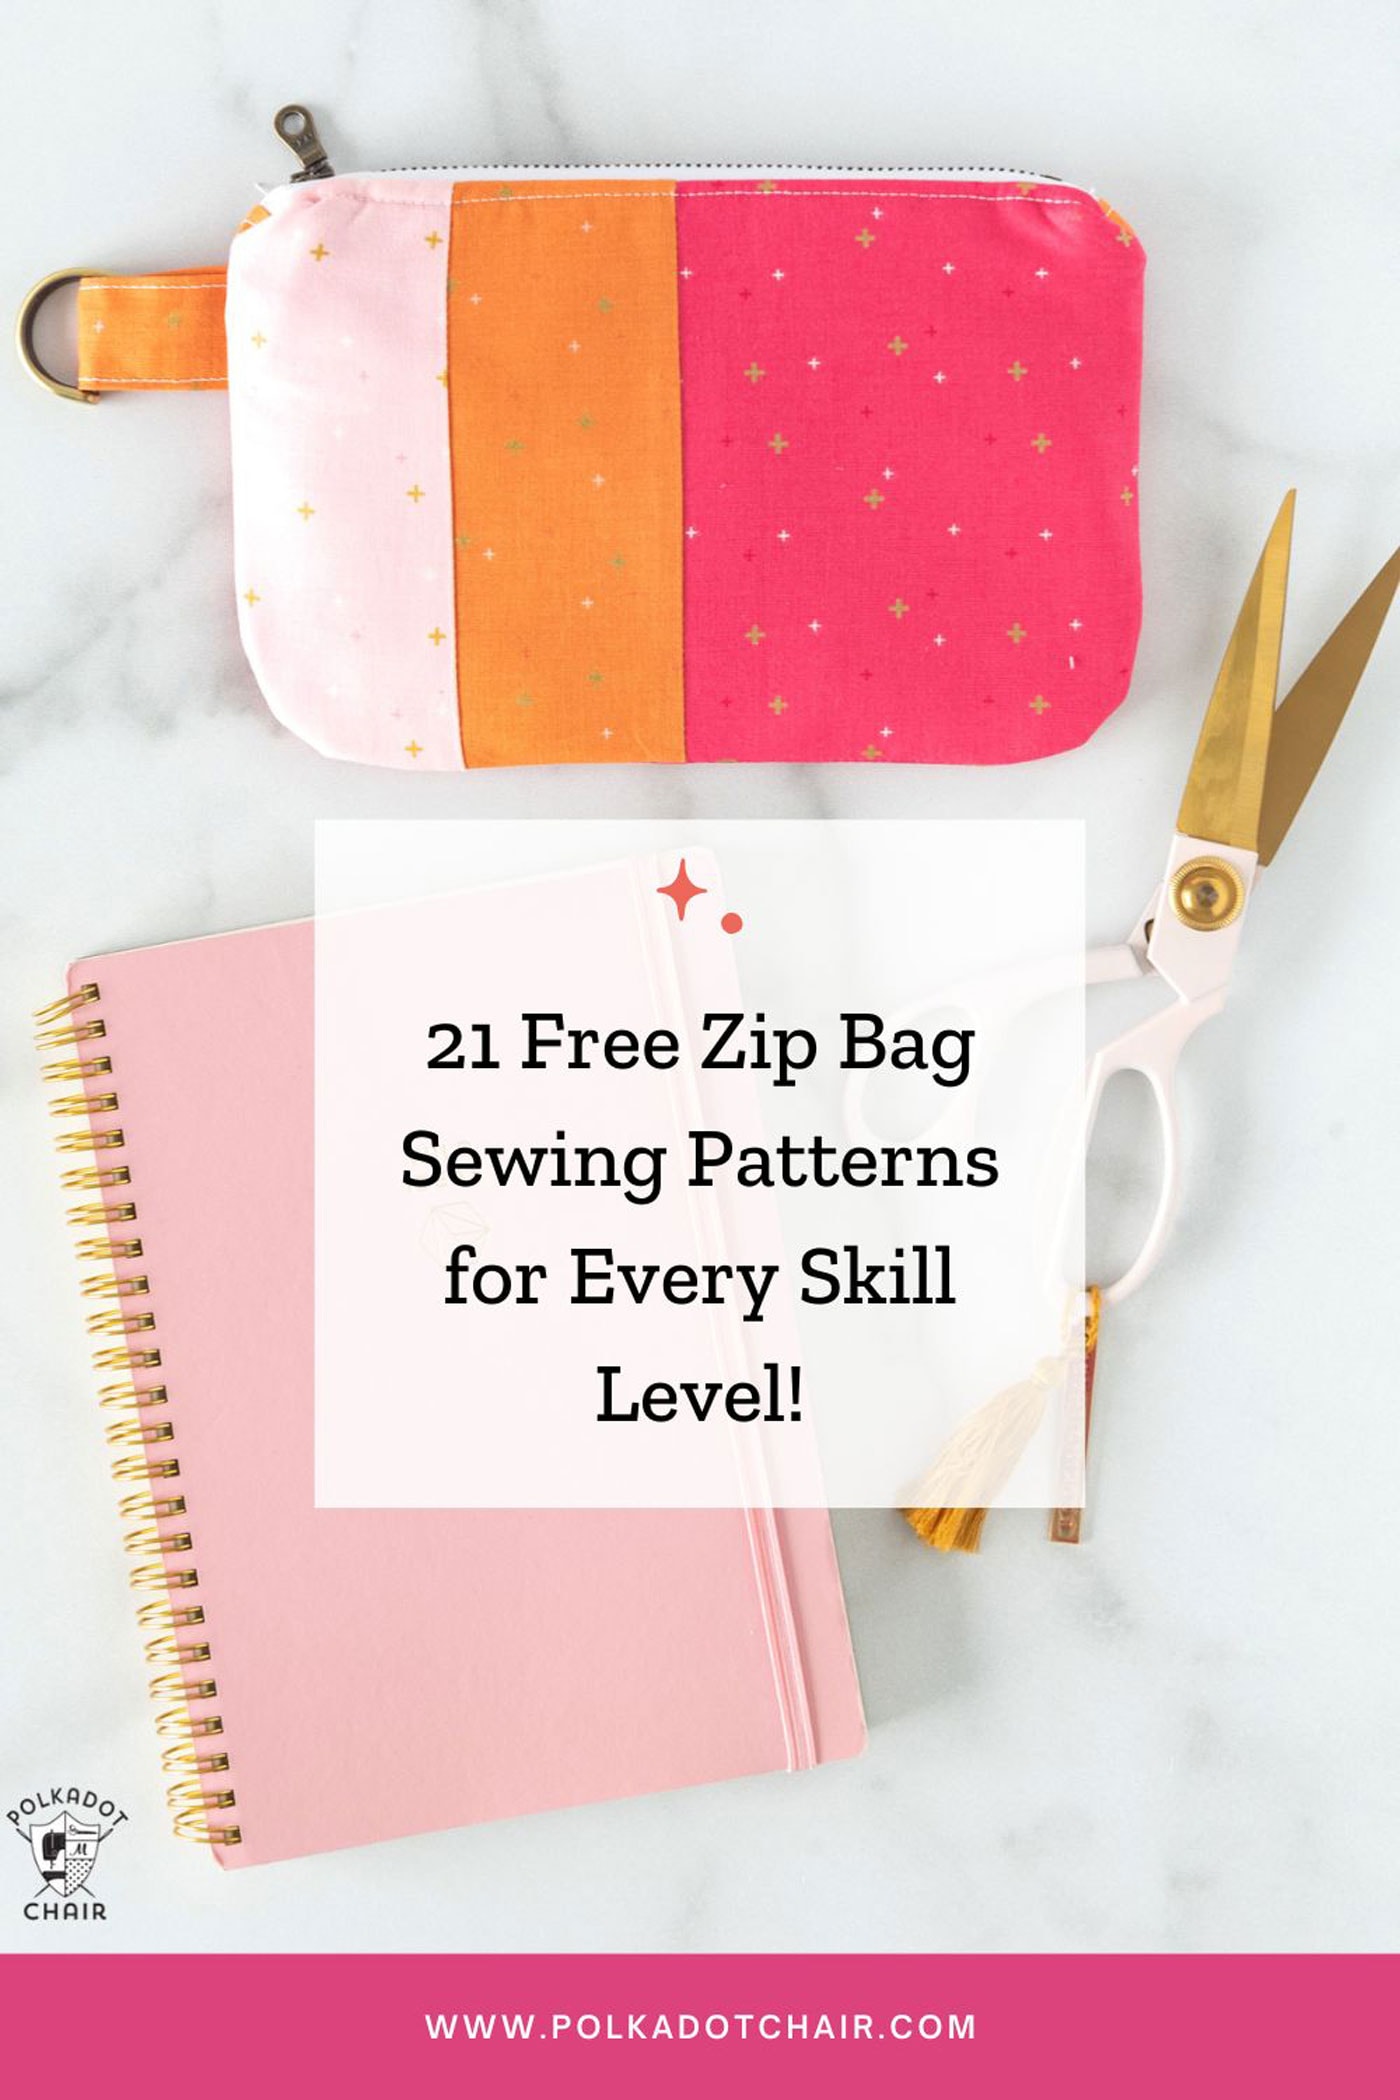 21 Free Zip Bag Sewing Patterns for Every Skill Level!